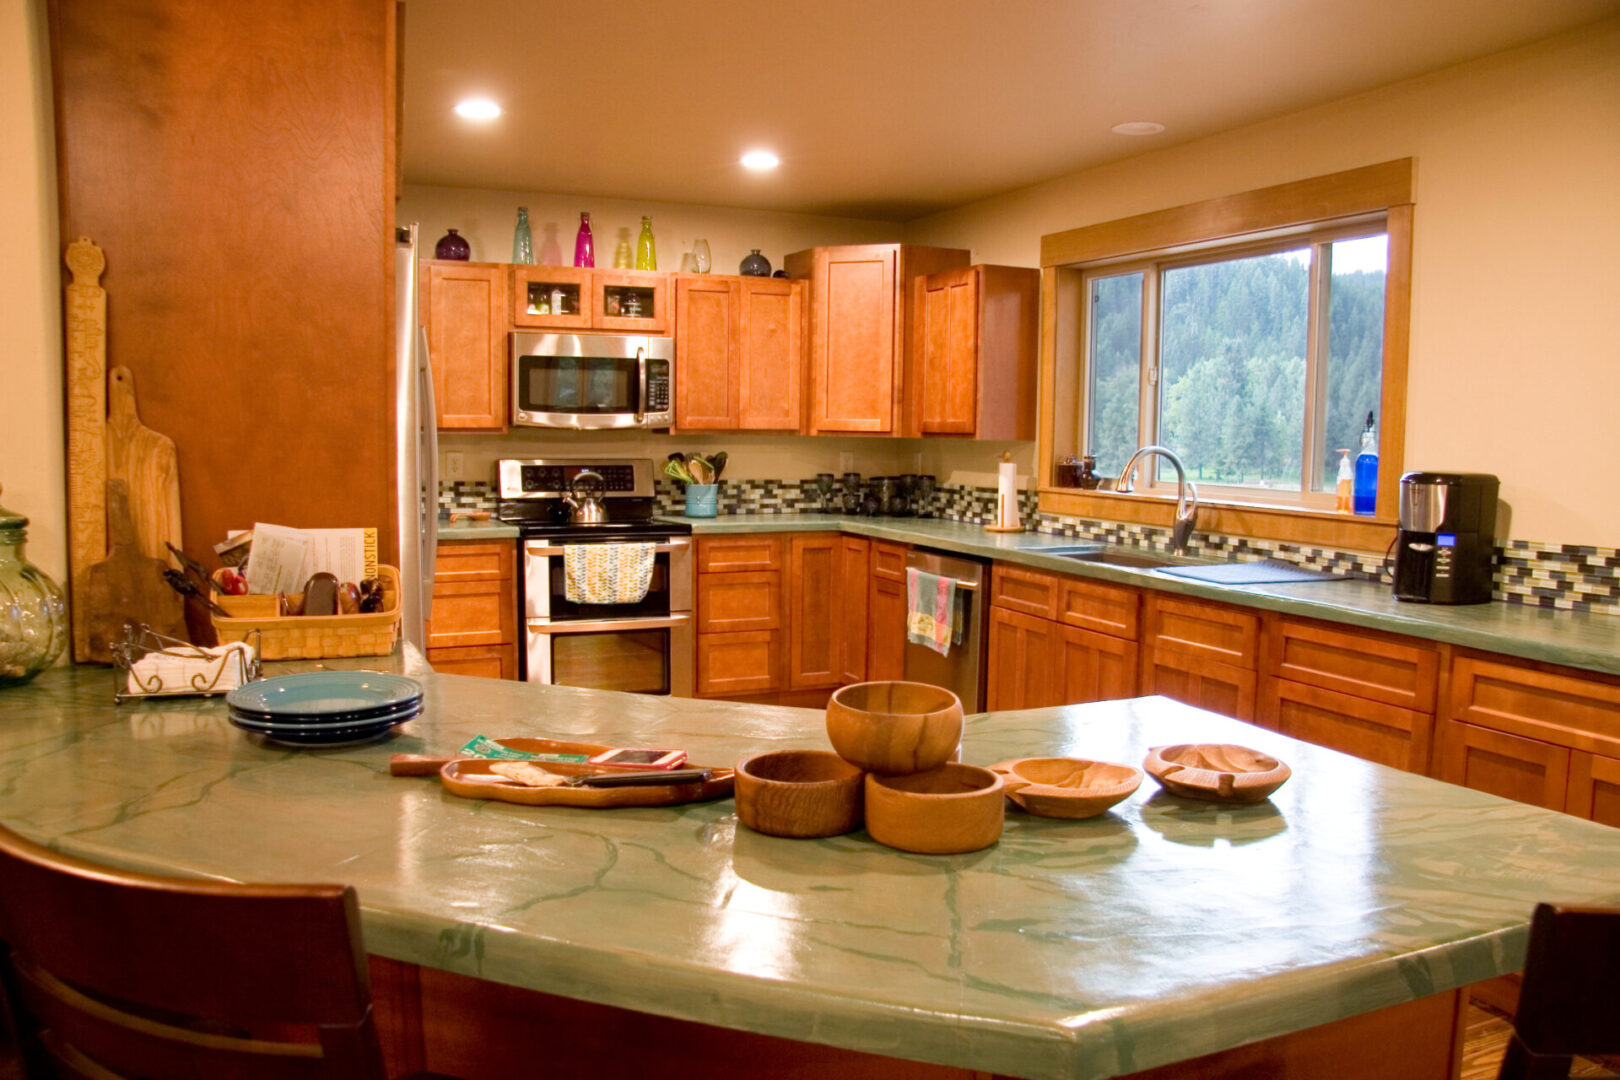 Wooden-themed kitchen with an island